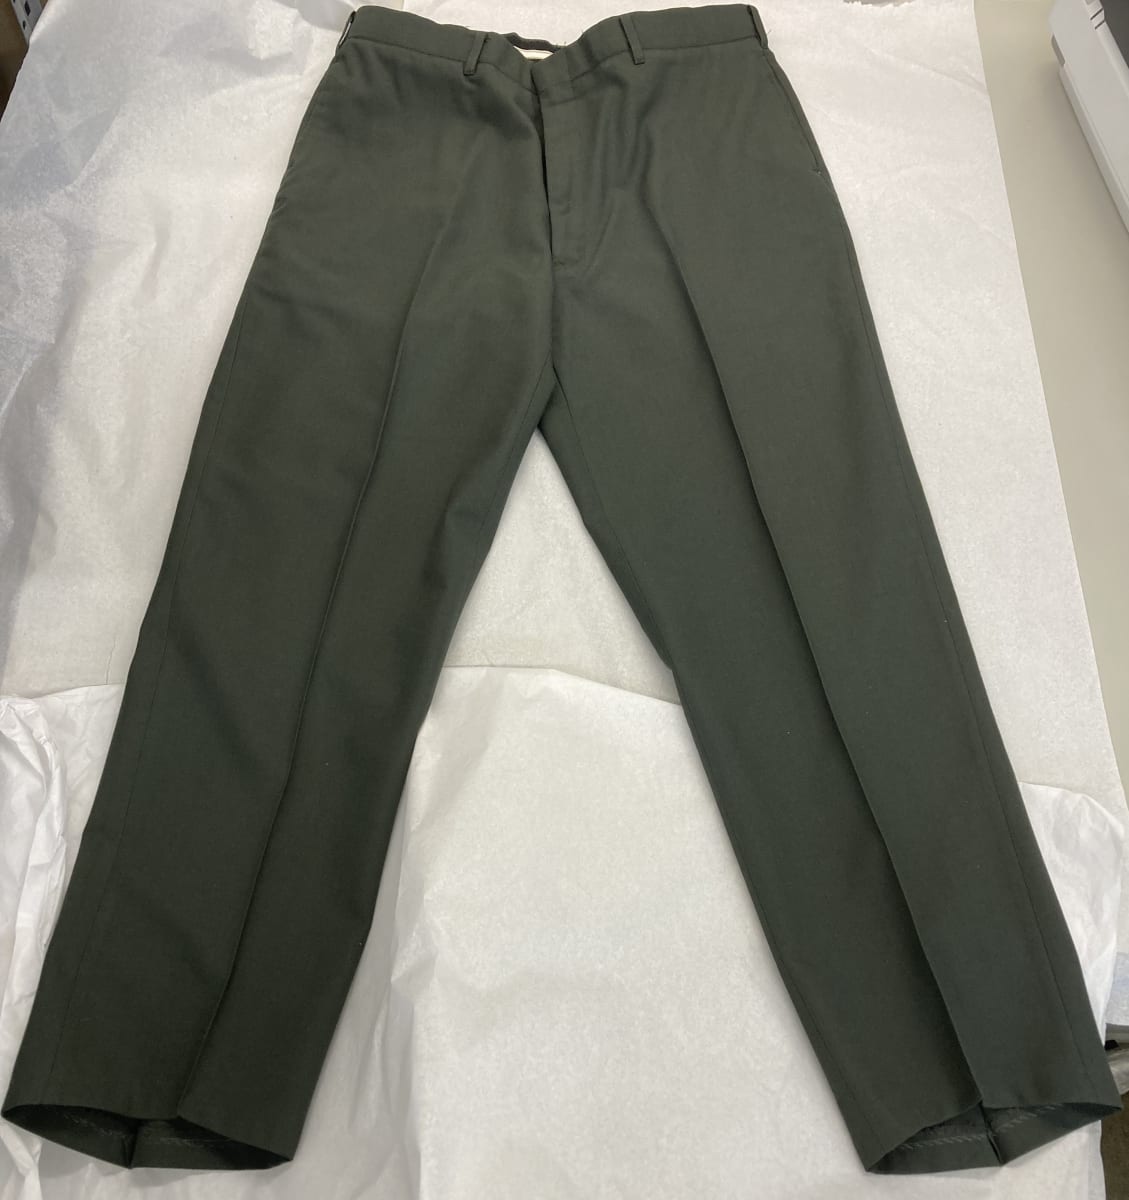 U.S. Army Uniform Trousers by Tennessee Apparel Corp.  Image: Front view